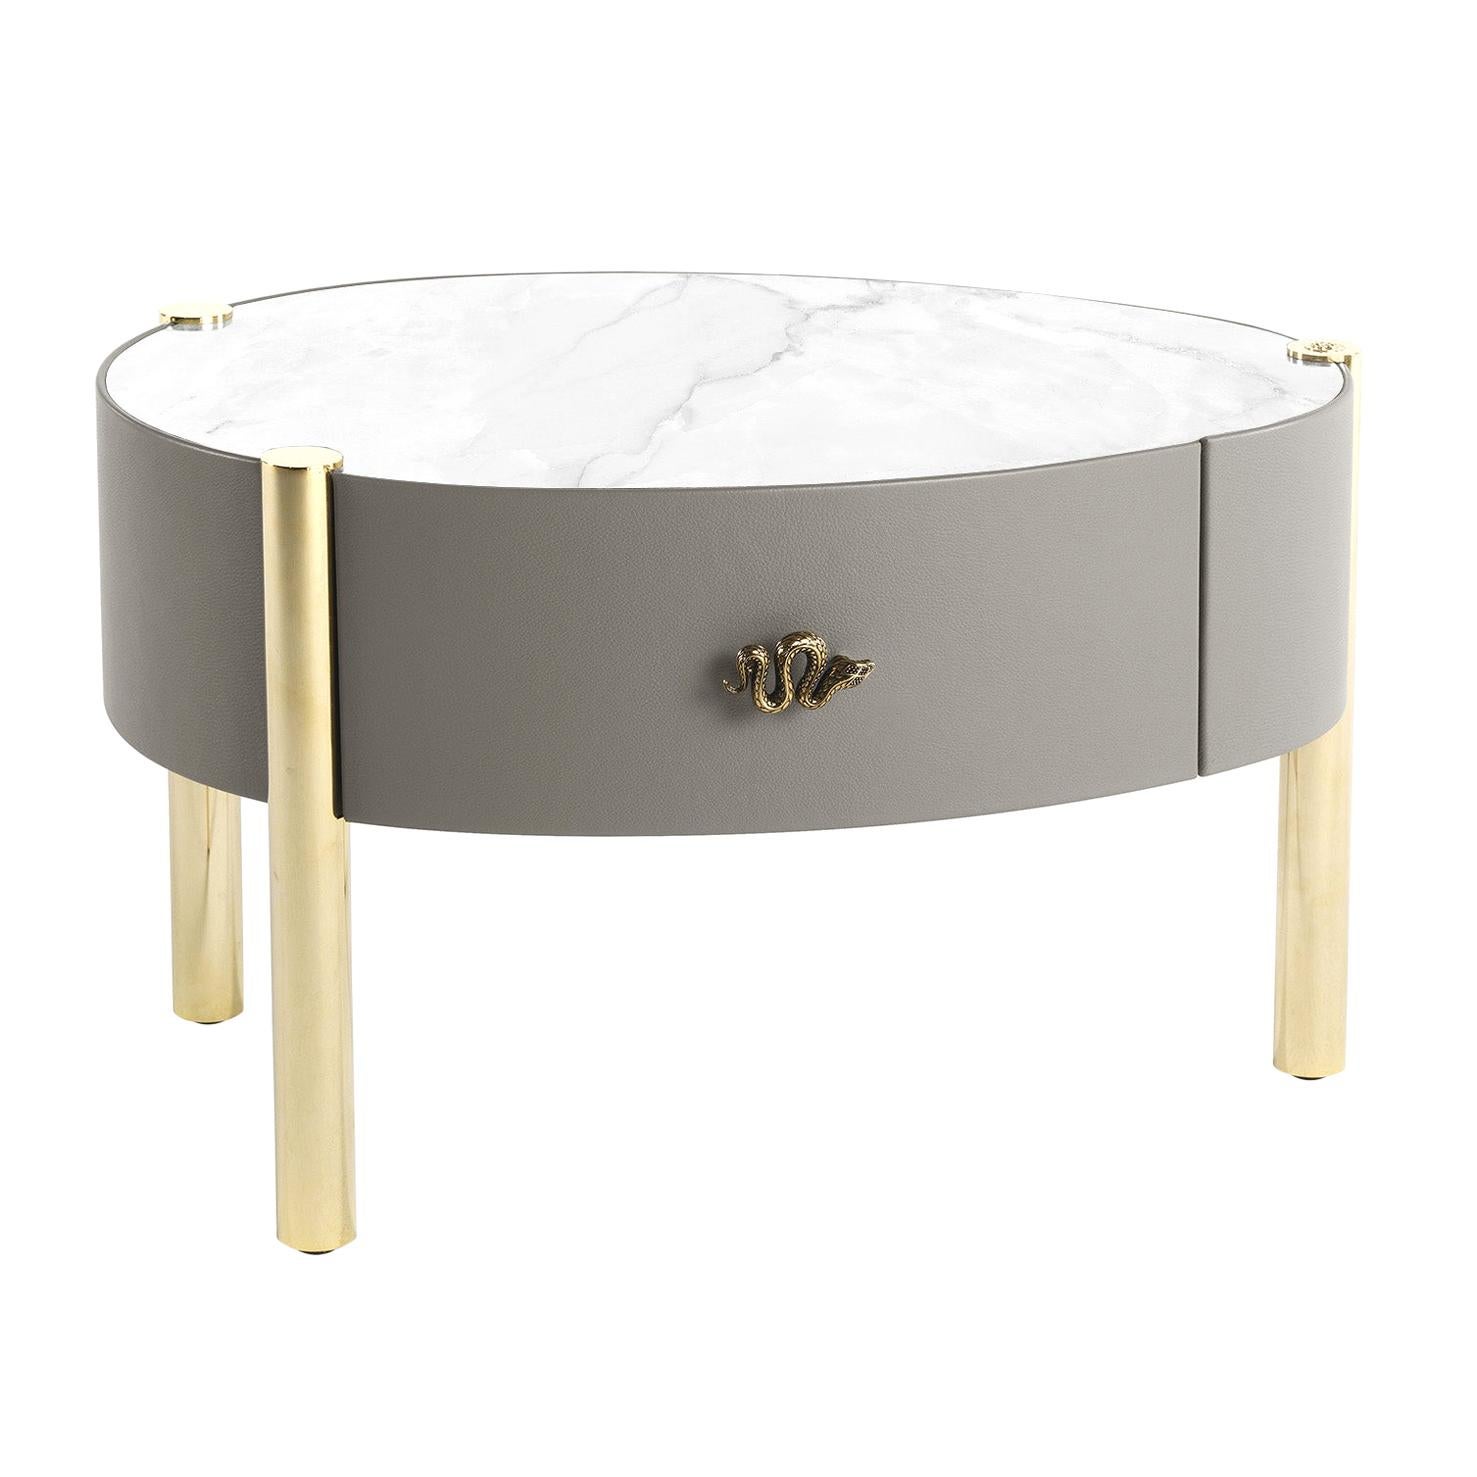 21st Century Trinidad Night Table with Marble by Roberto Cavalli Home Interiors